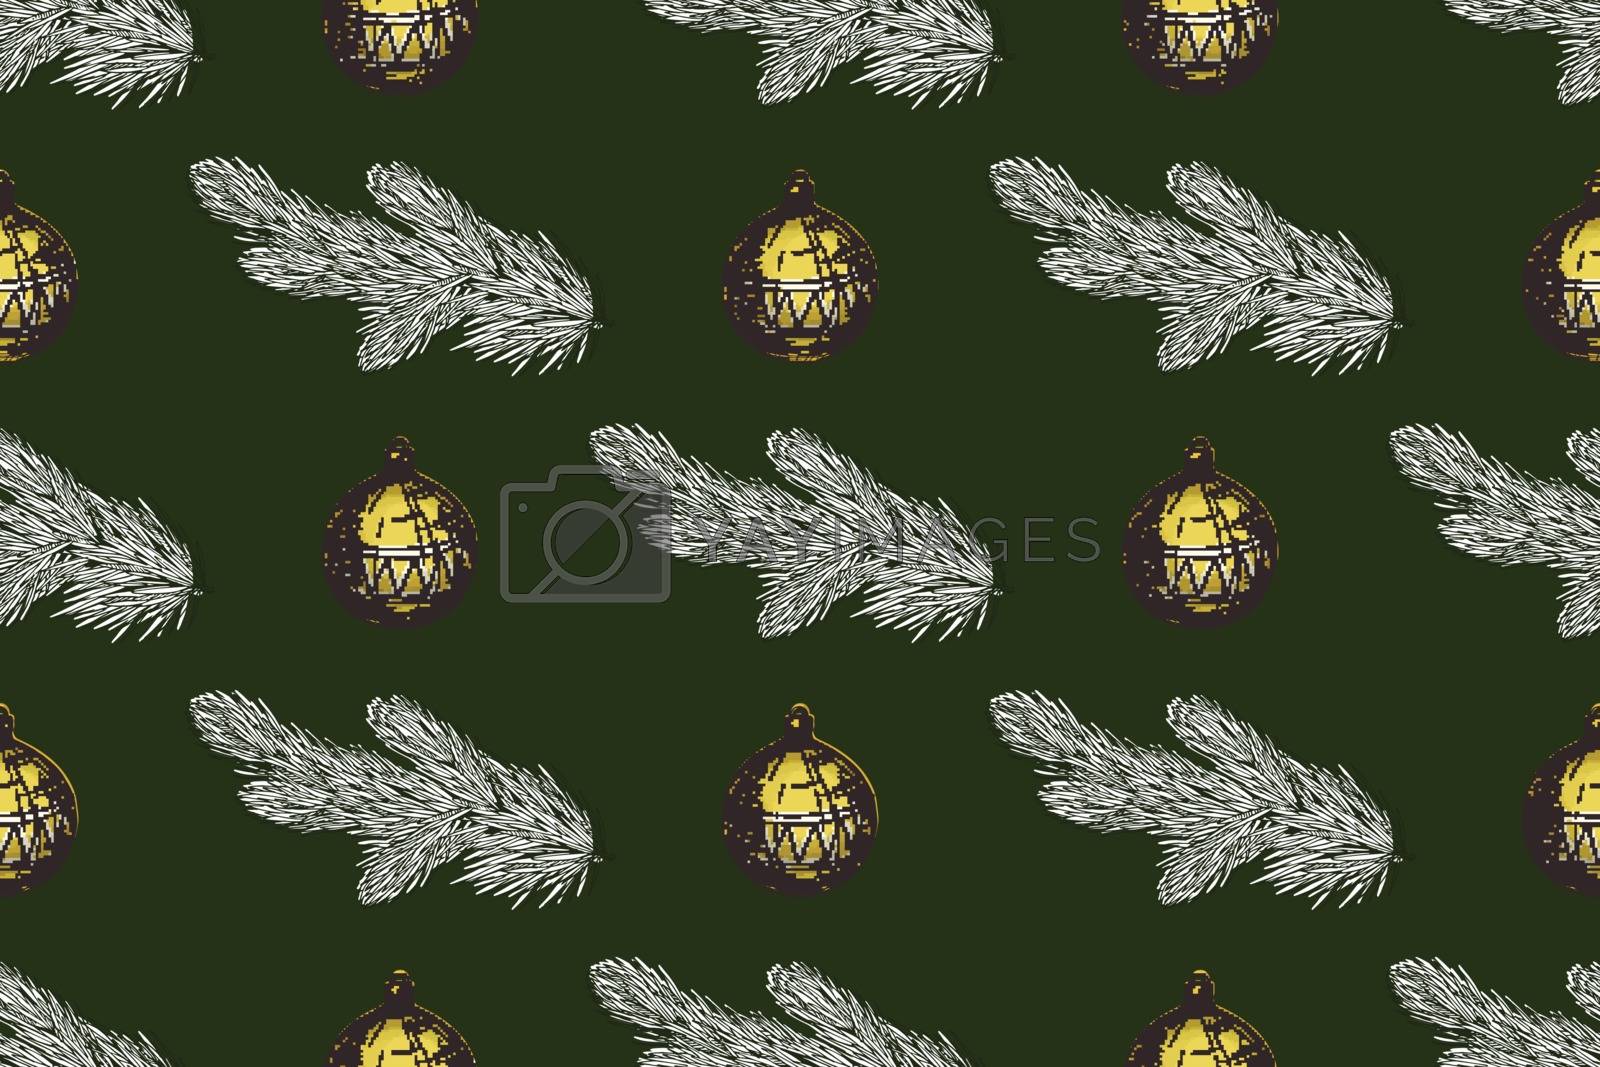 Royalty free image of Seamless Christmas pattern with fir branches and Christmas toys on a green background by nutela_pancake